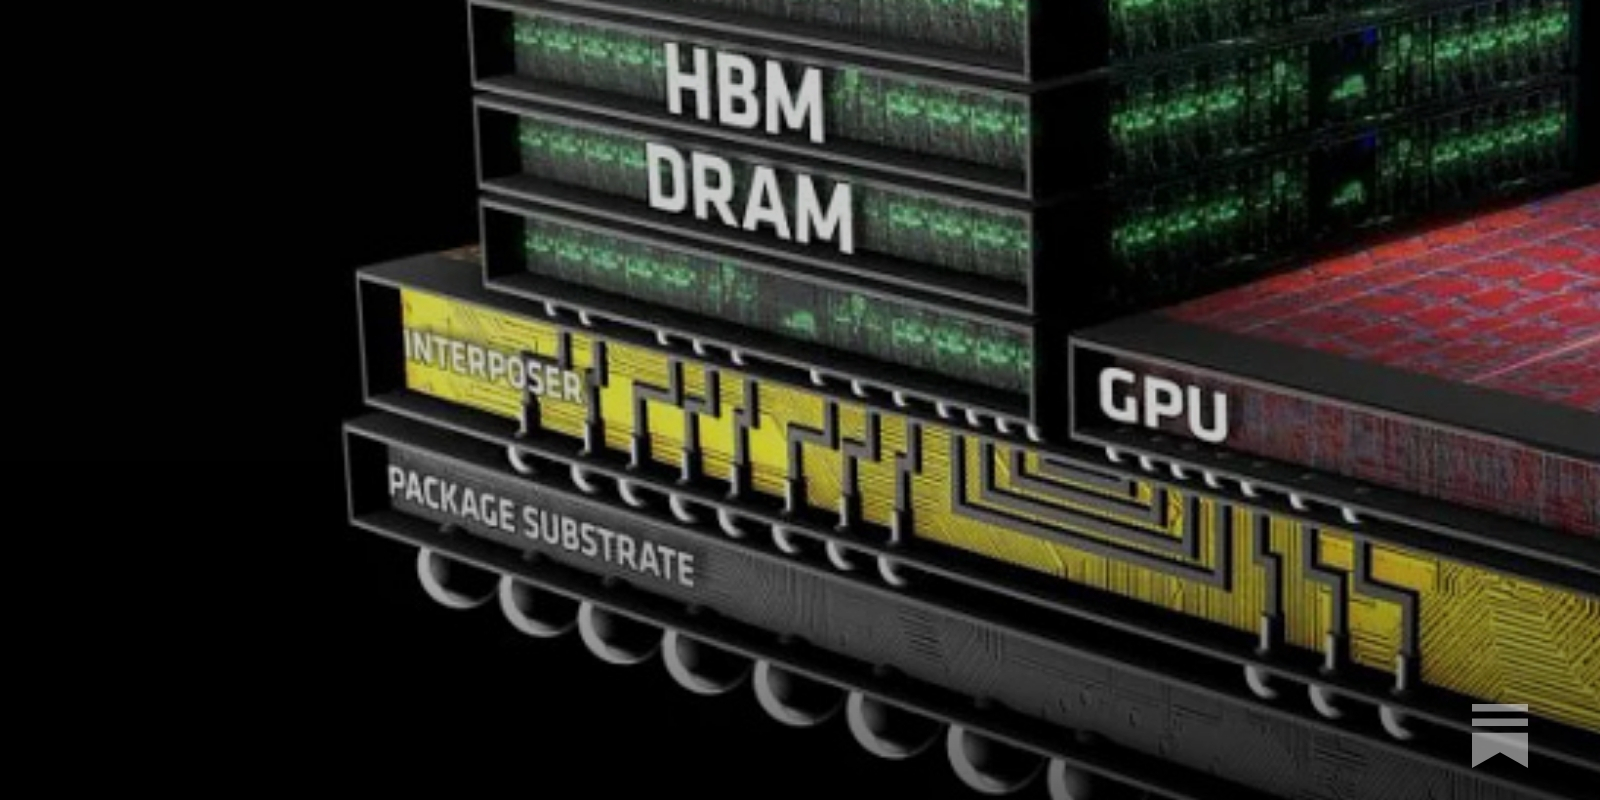 HBM's Future: Necessary But Expensive